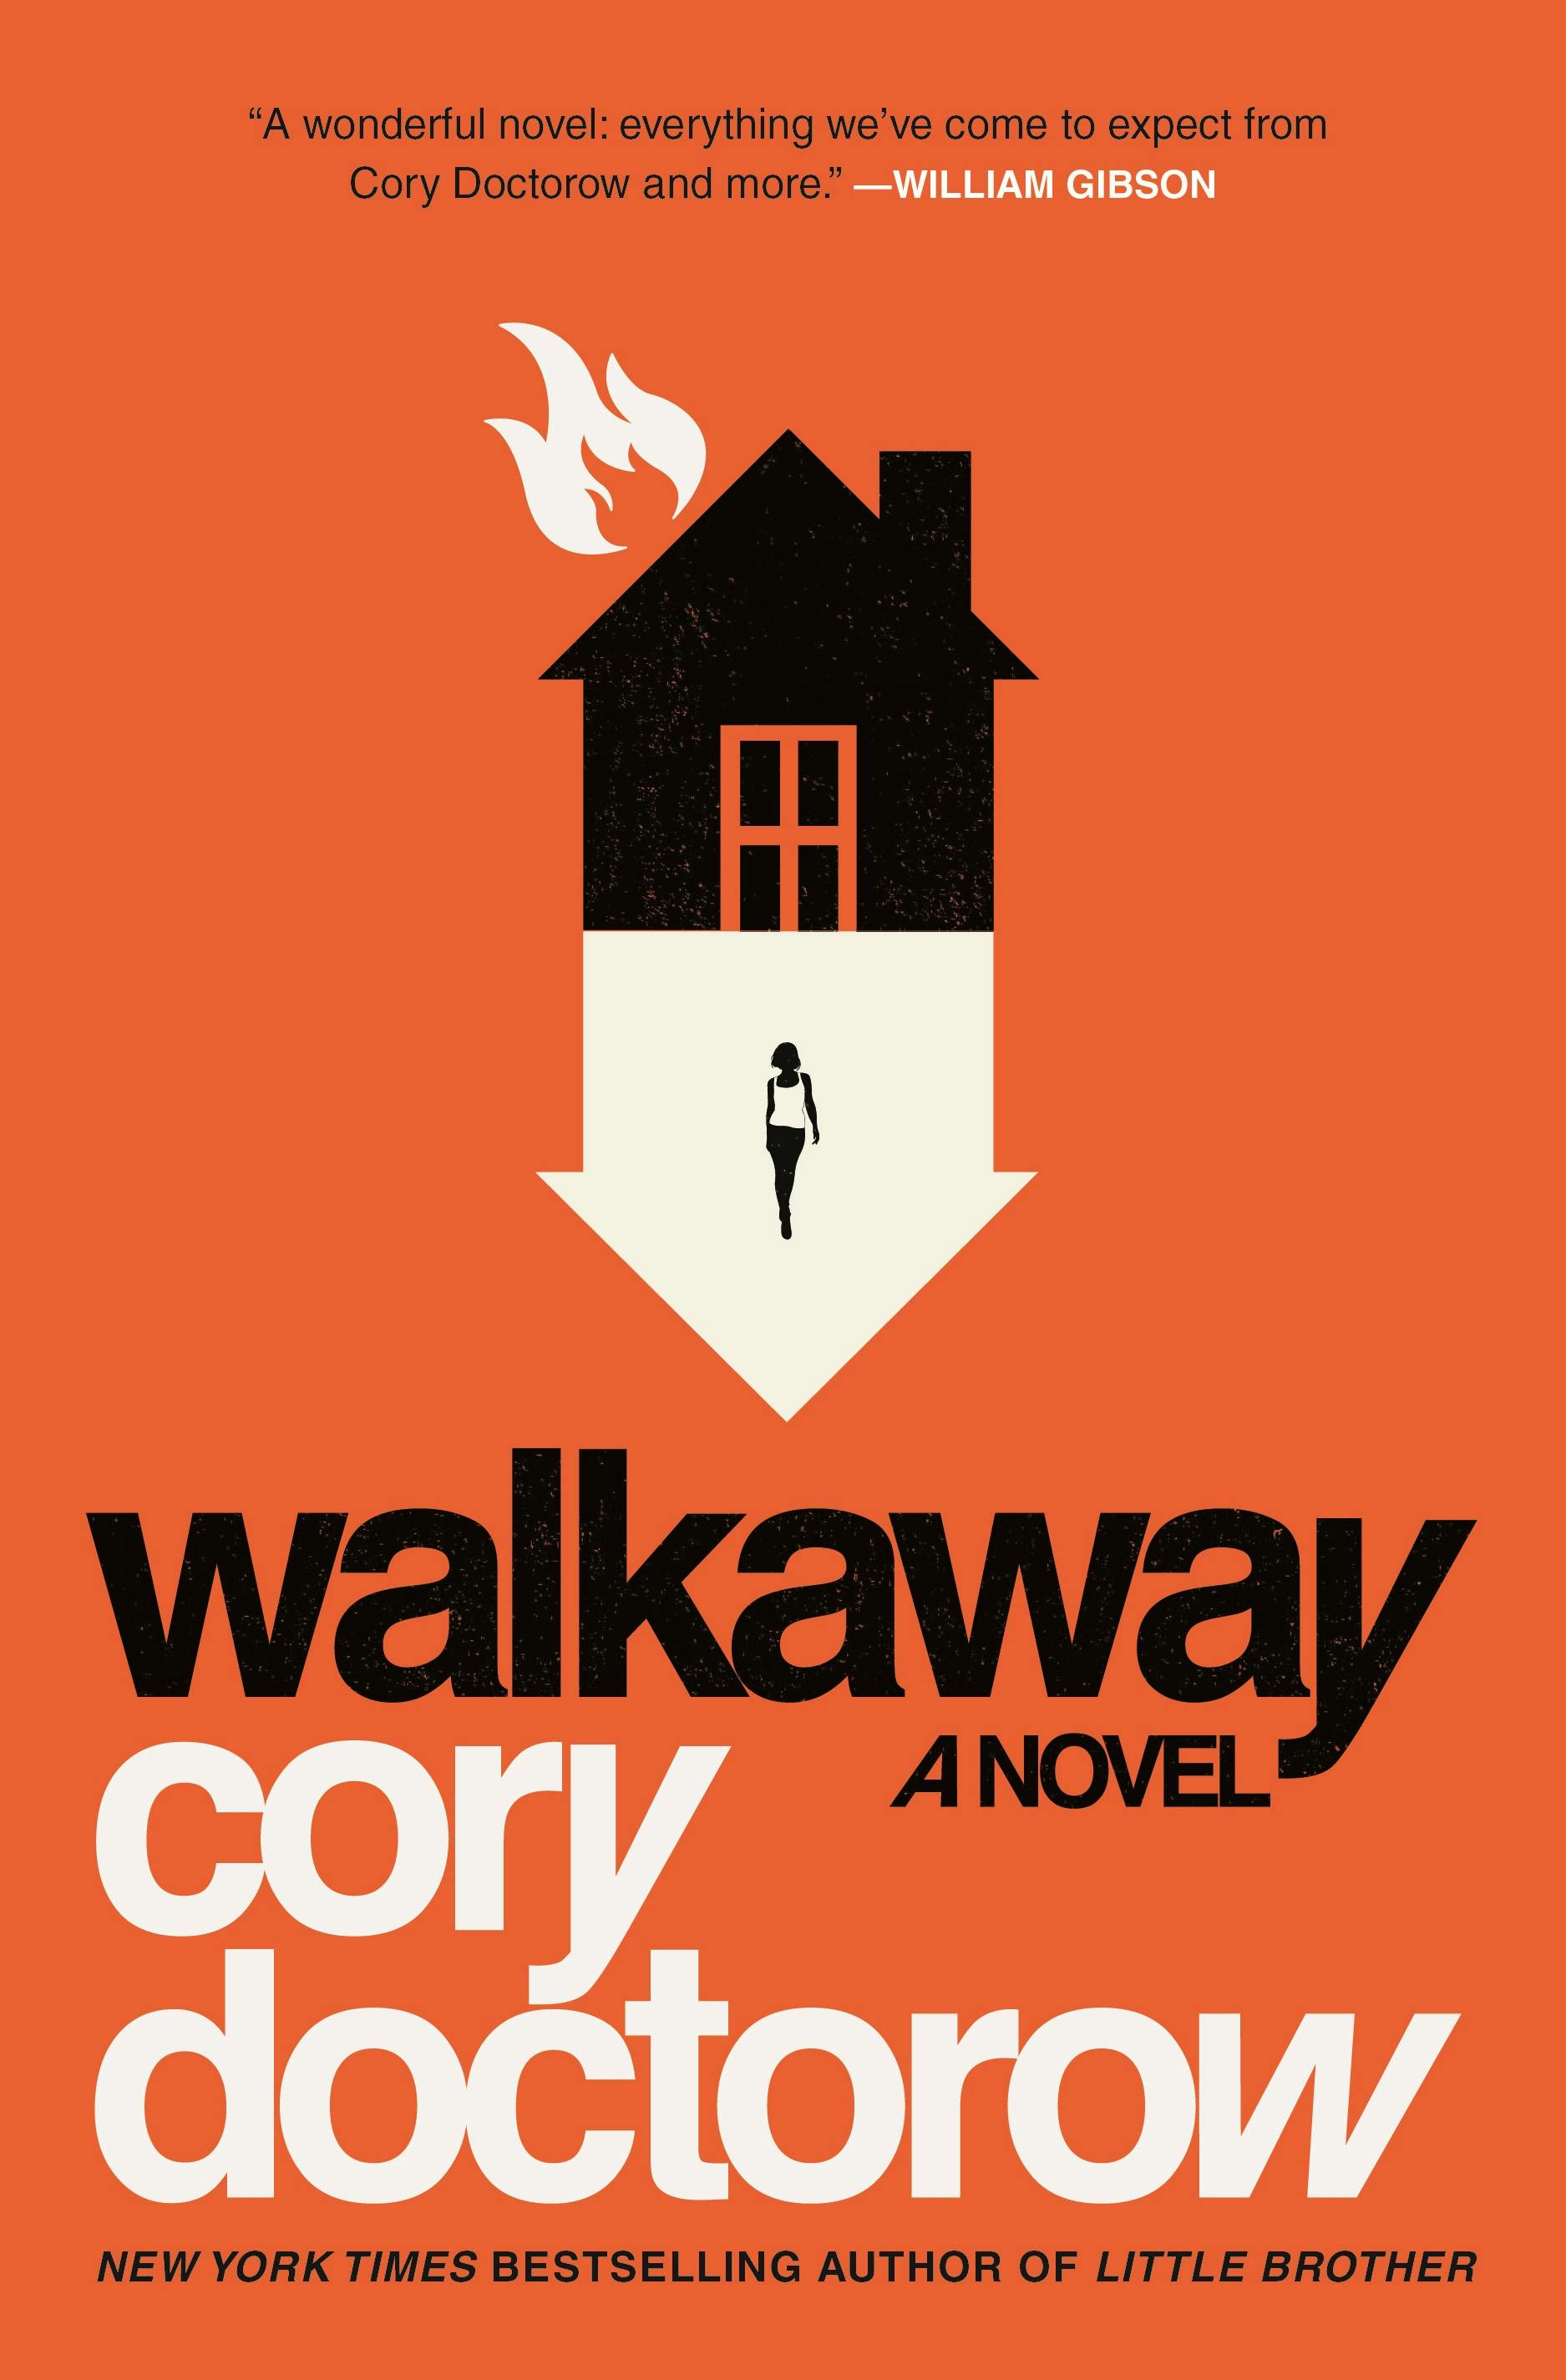 Cover for the book titled as: Walkaway